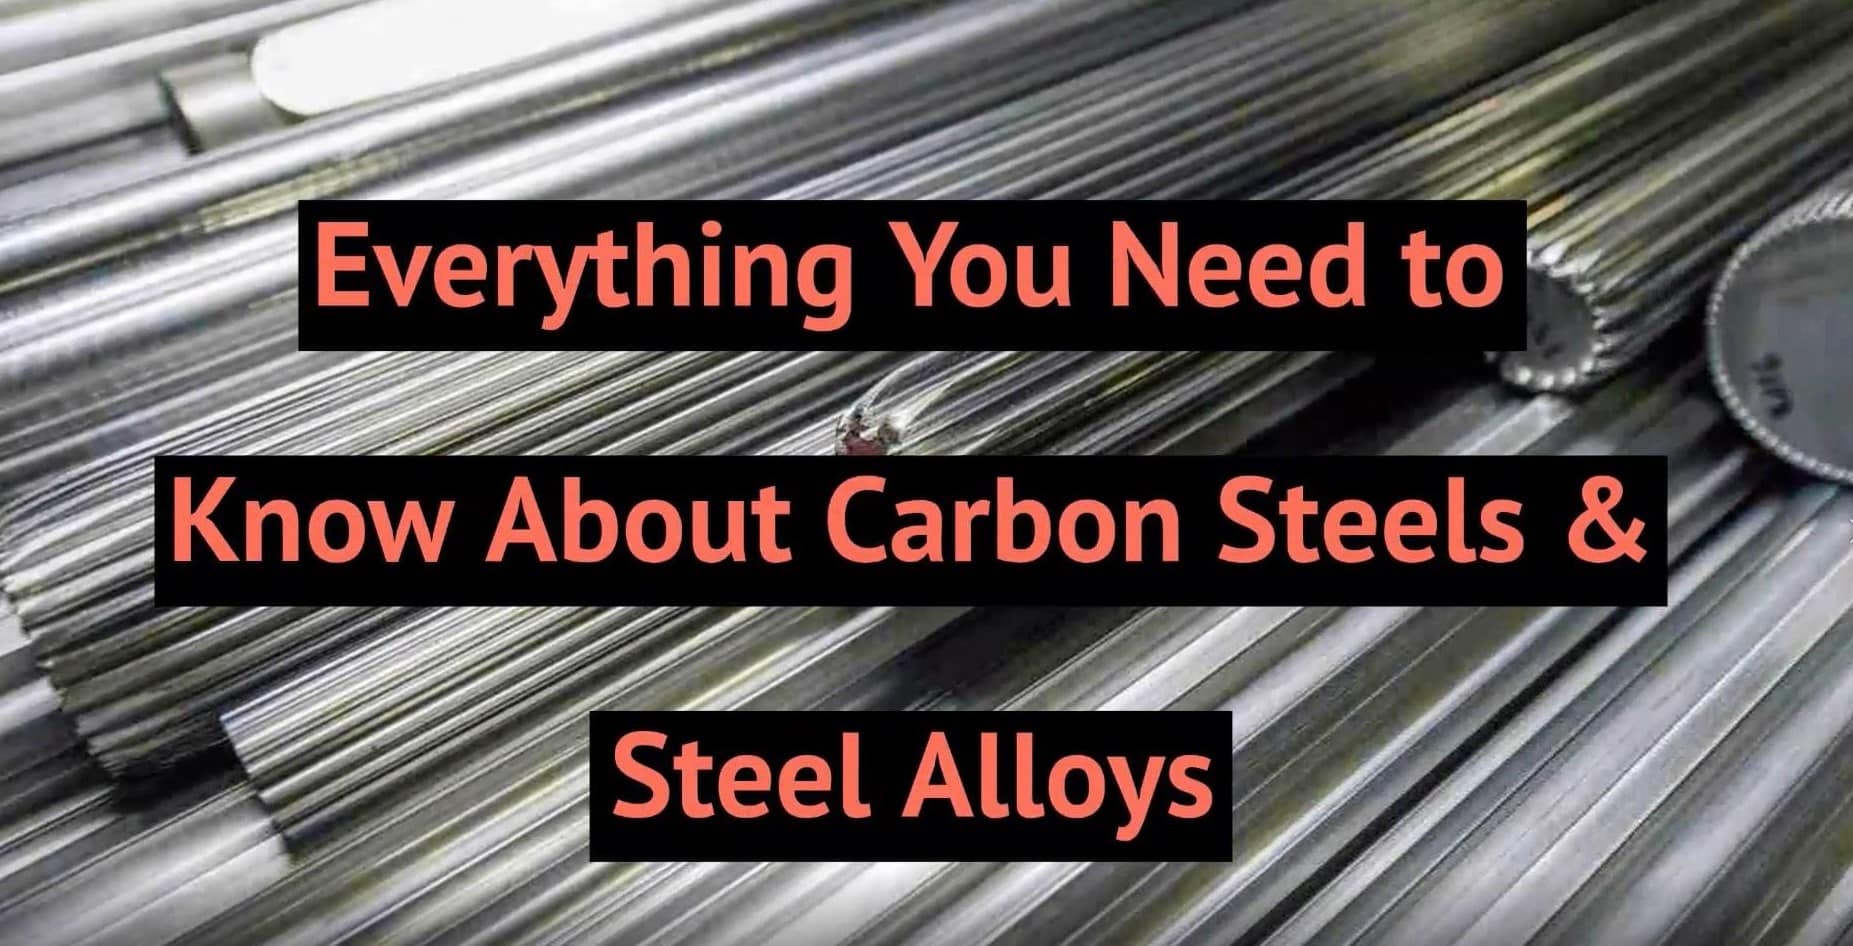 Everything You Need to Know About Carbon Steels & Steel Alloys